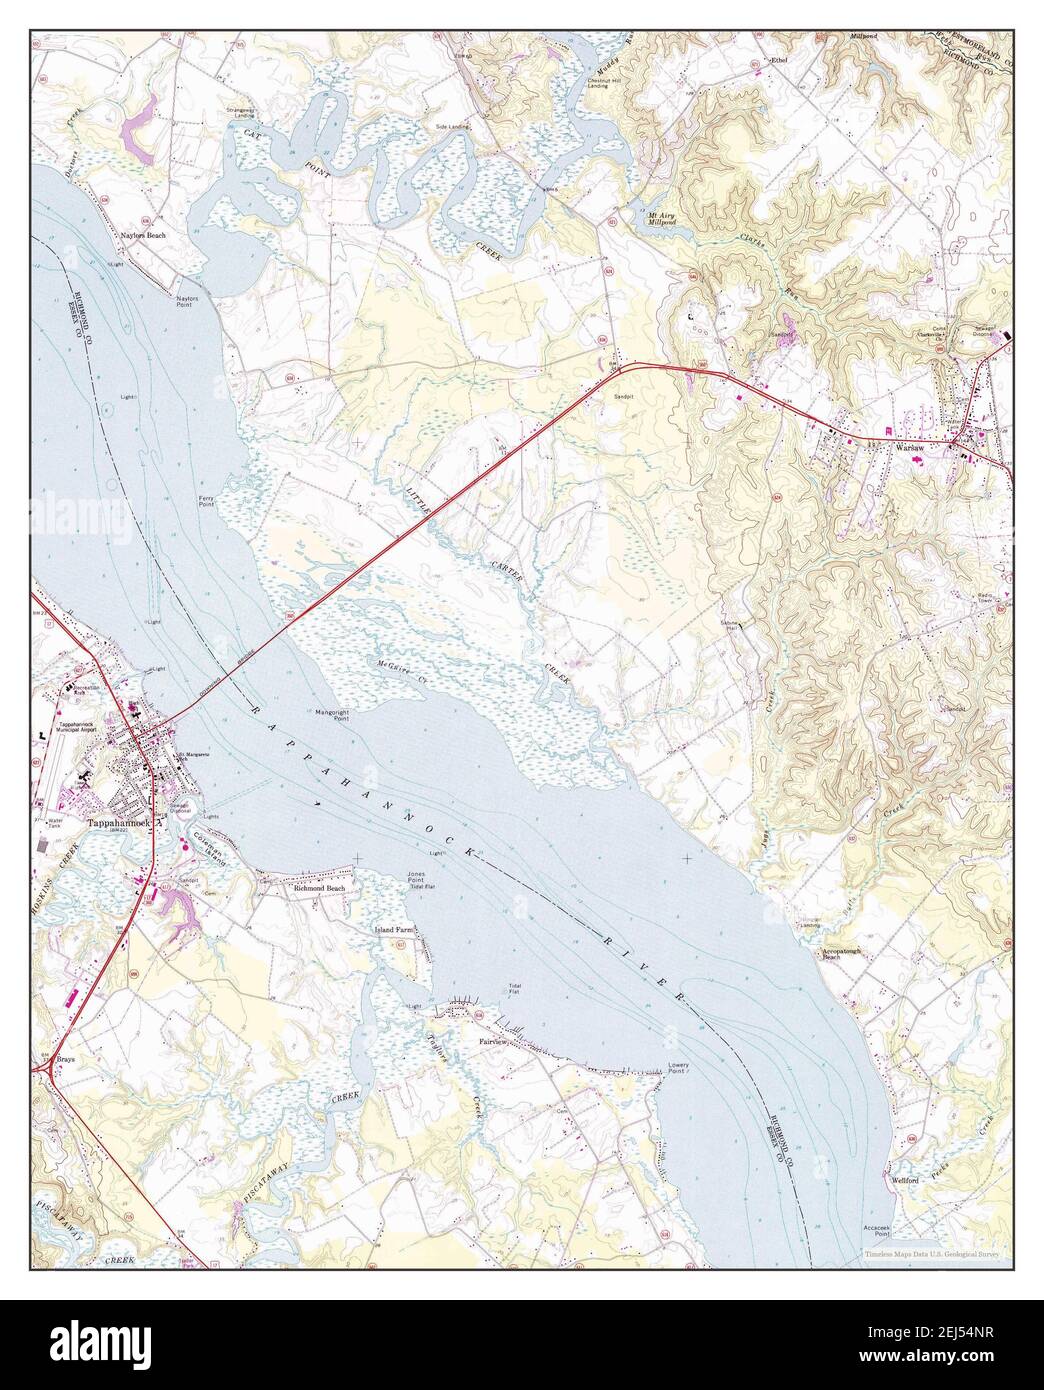 Tappahannock, Virginia, map 1968, 1:24000, United States of America by Timeless Maps, data U.S. Geological Survey Stock Photo